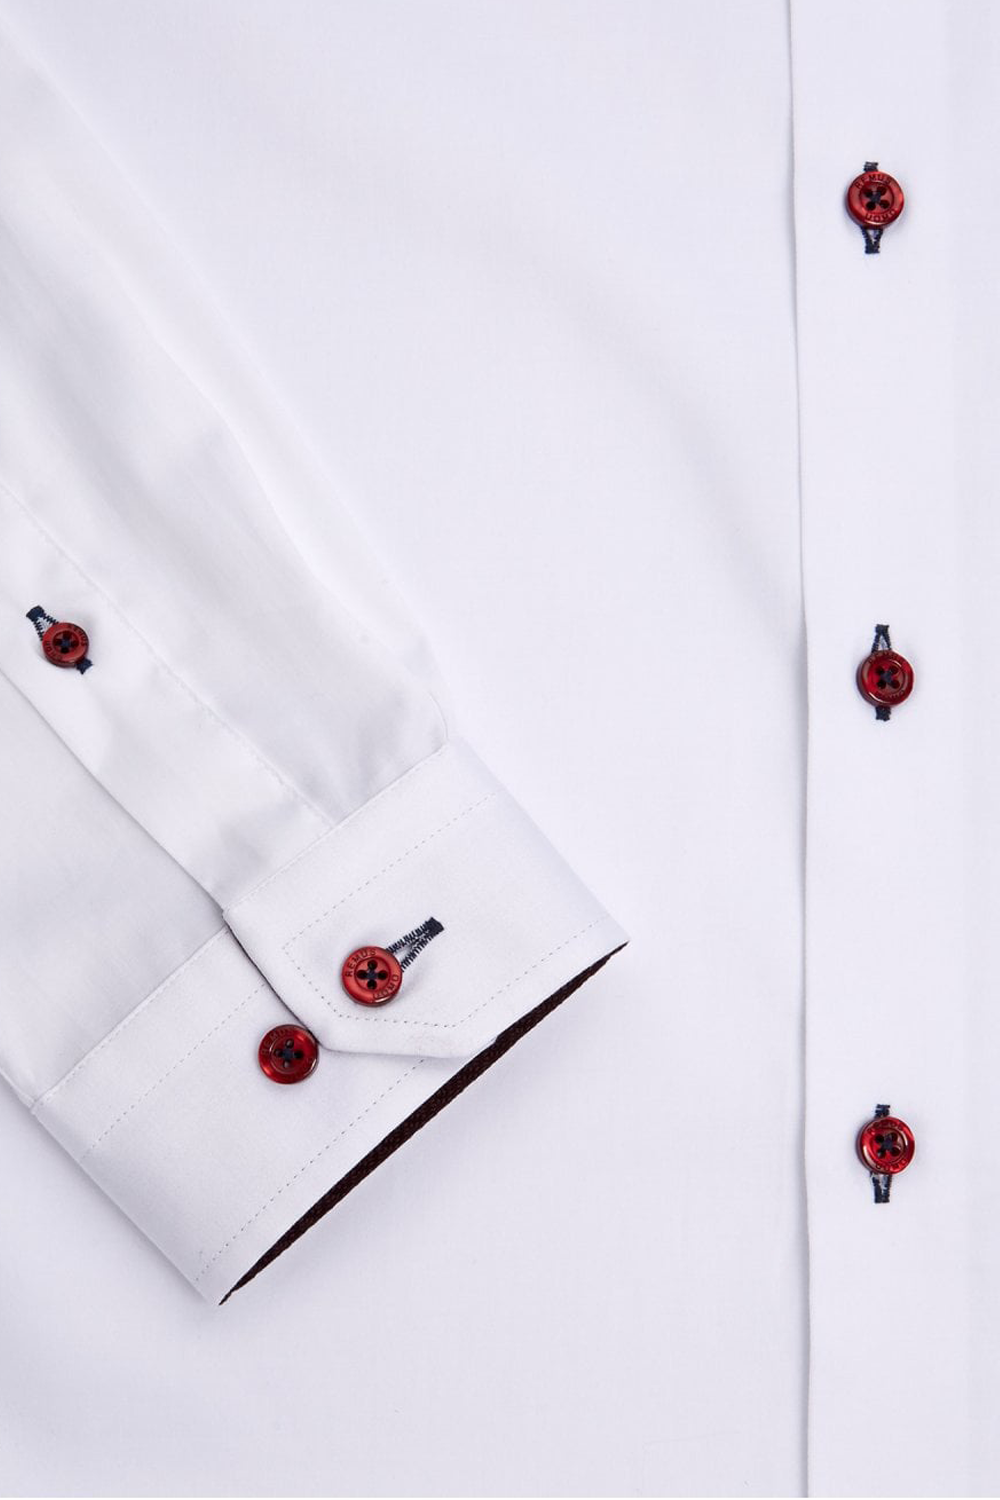 Buy the Remus Uomo Collared Detail Shirt White at Intro. Spend £50 for free UK delivery. Official stockists. We ship worldwide.